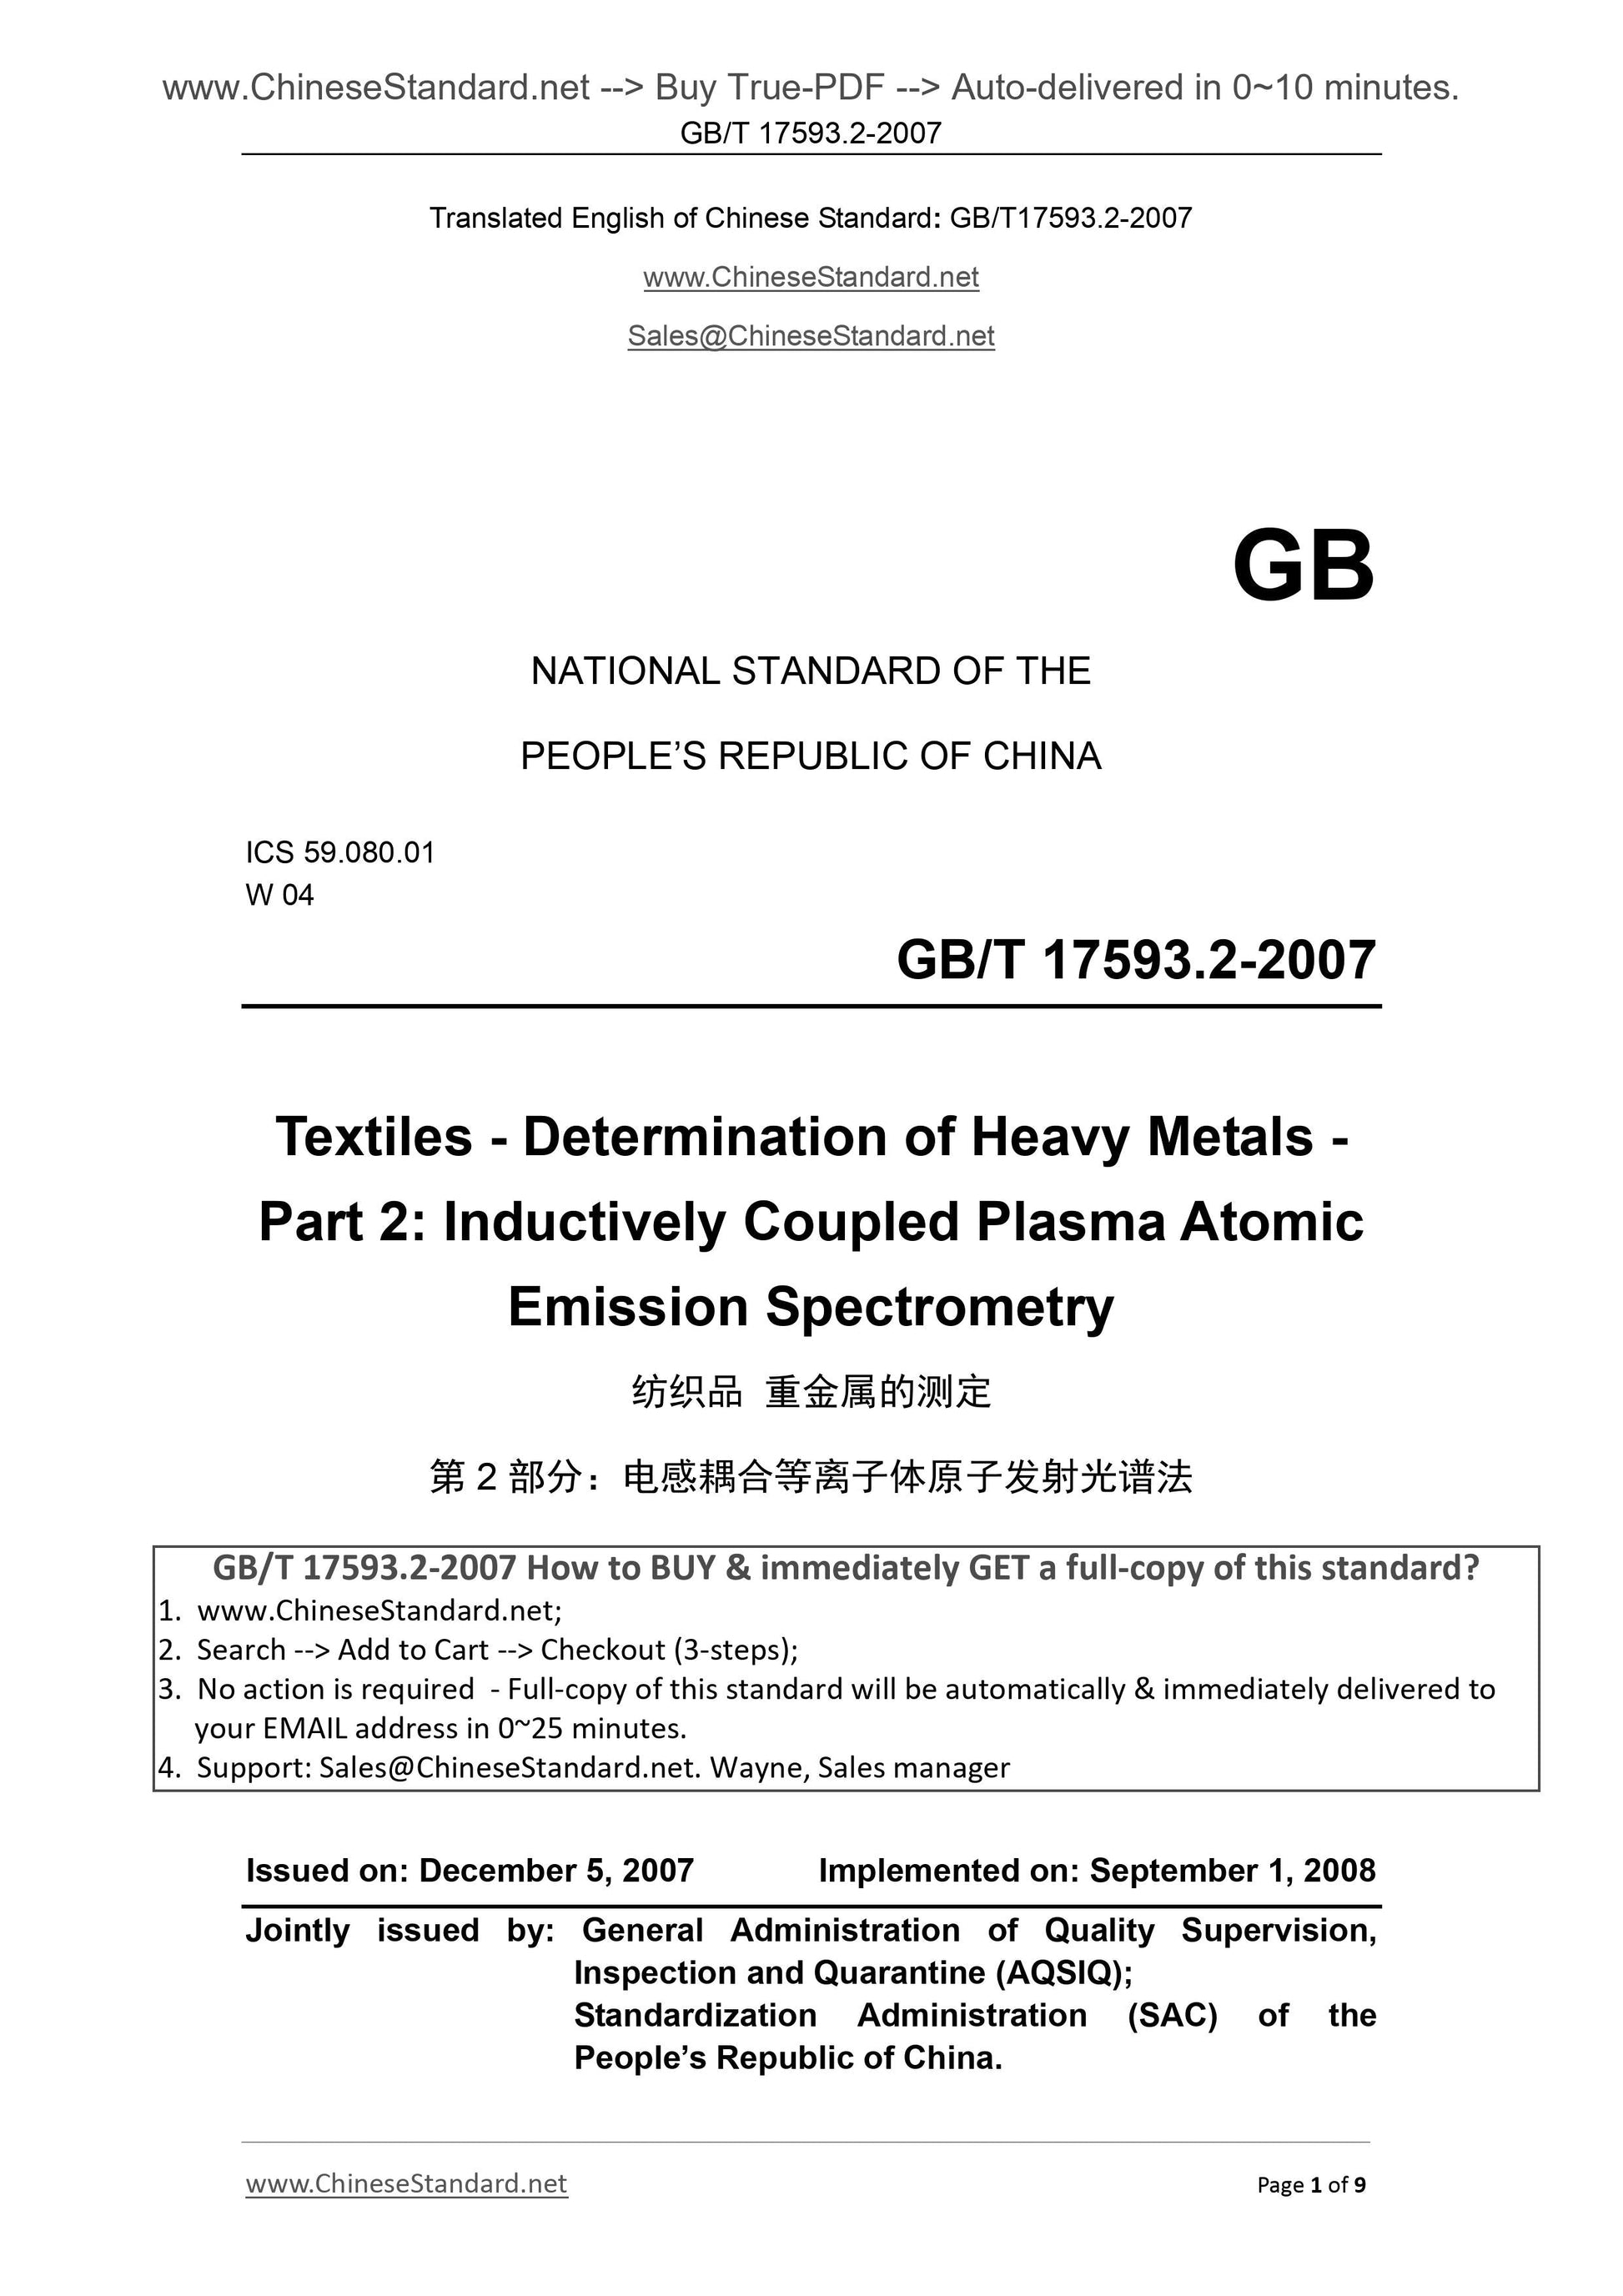 GB/T 17593.2-2007 Page 1